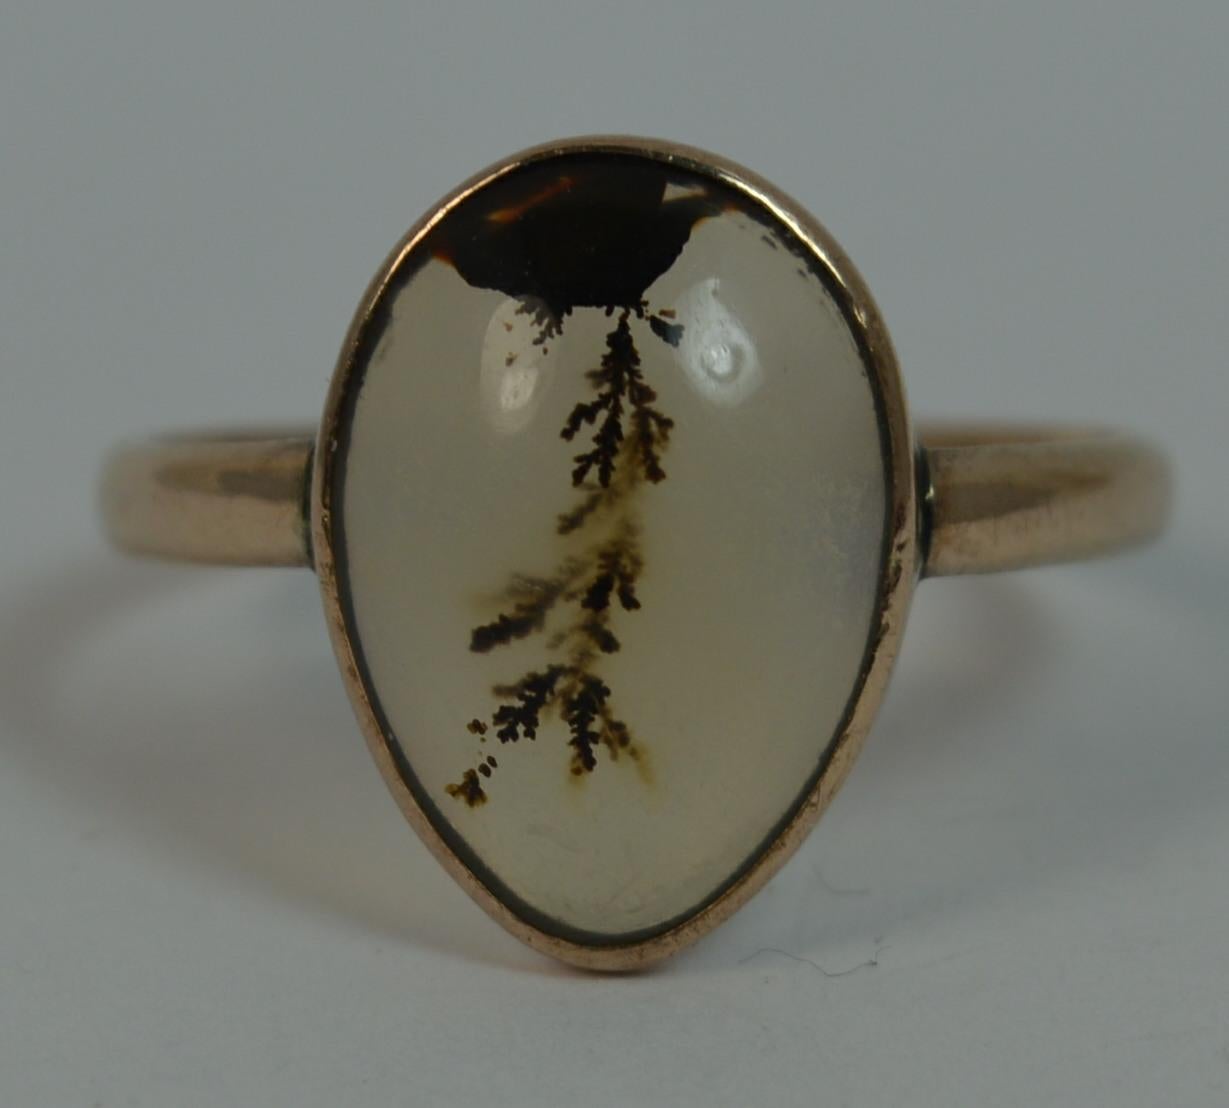 
An antique 9 carat rose gold and single dendritic agate ring.

10mm x 15mm agate. 2.4 grams.

Size S UK, 9 US

Great overall condition. Clean stone, light wear. Clean shank.
